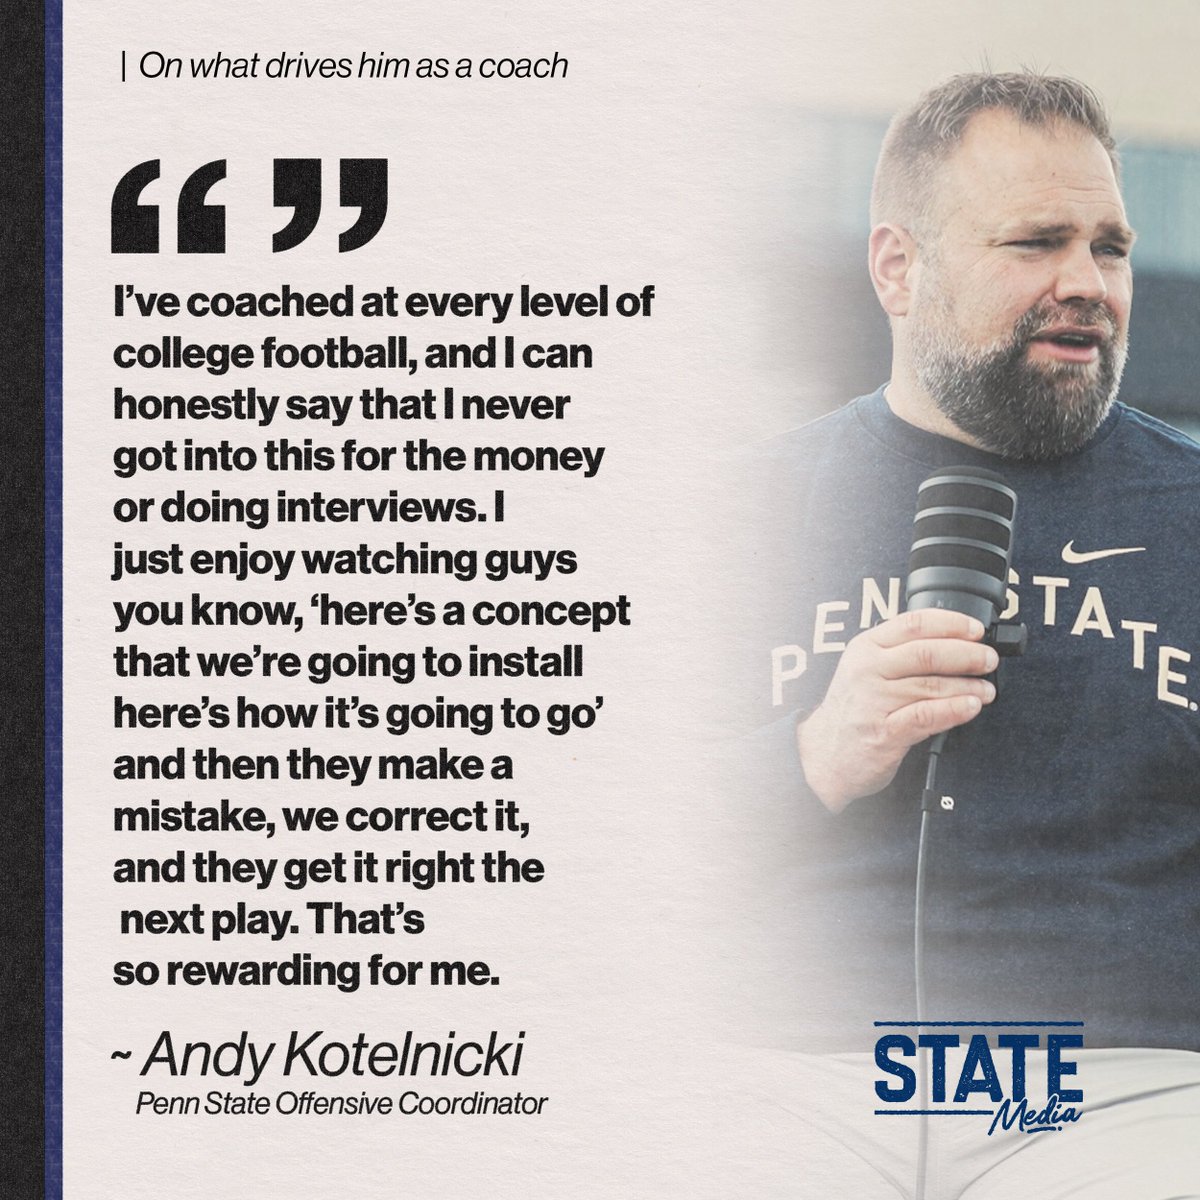 Penn State offensive coordinator Andy Kotelnicki on what drives him as a coach 💯